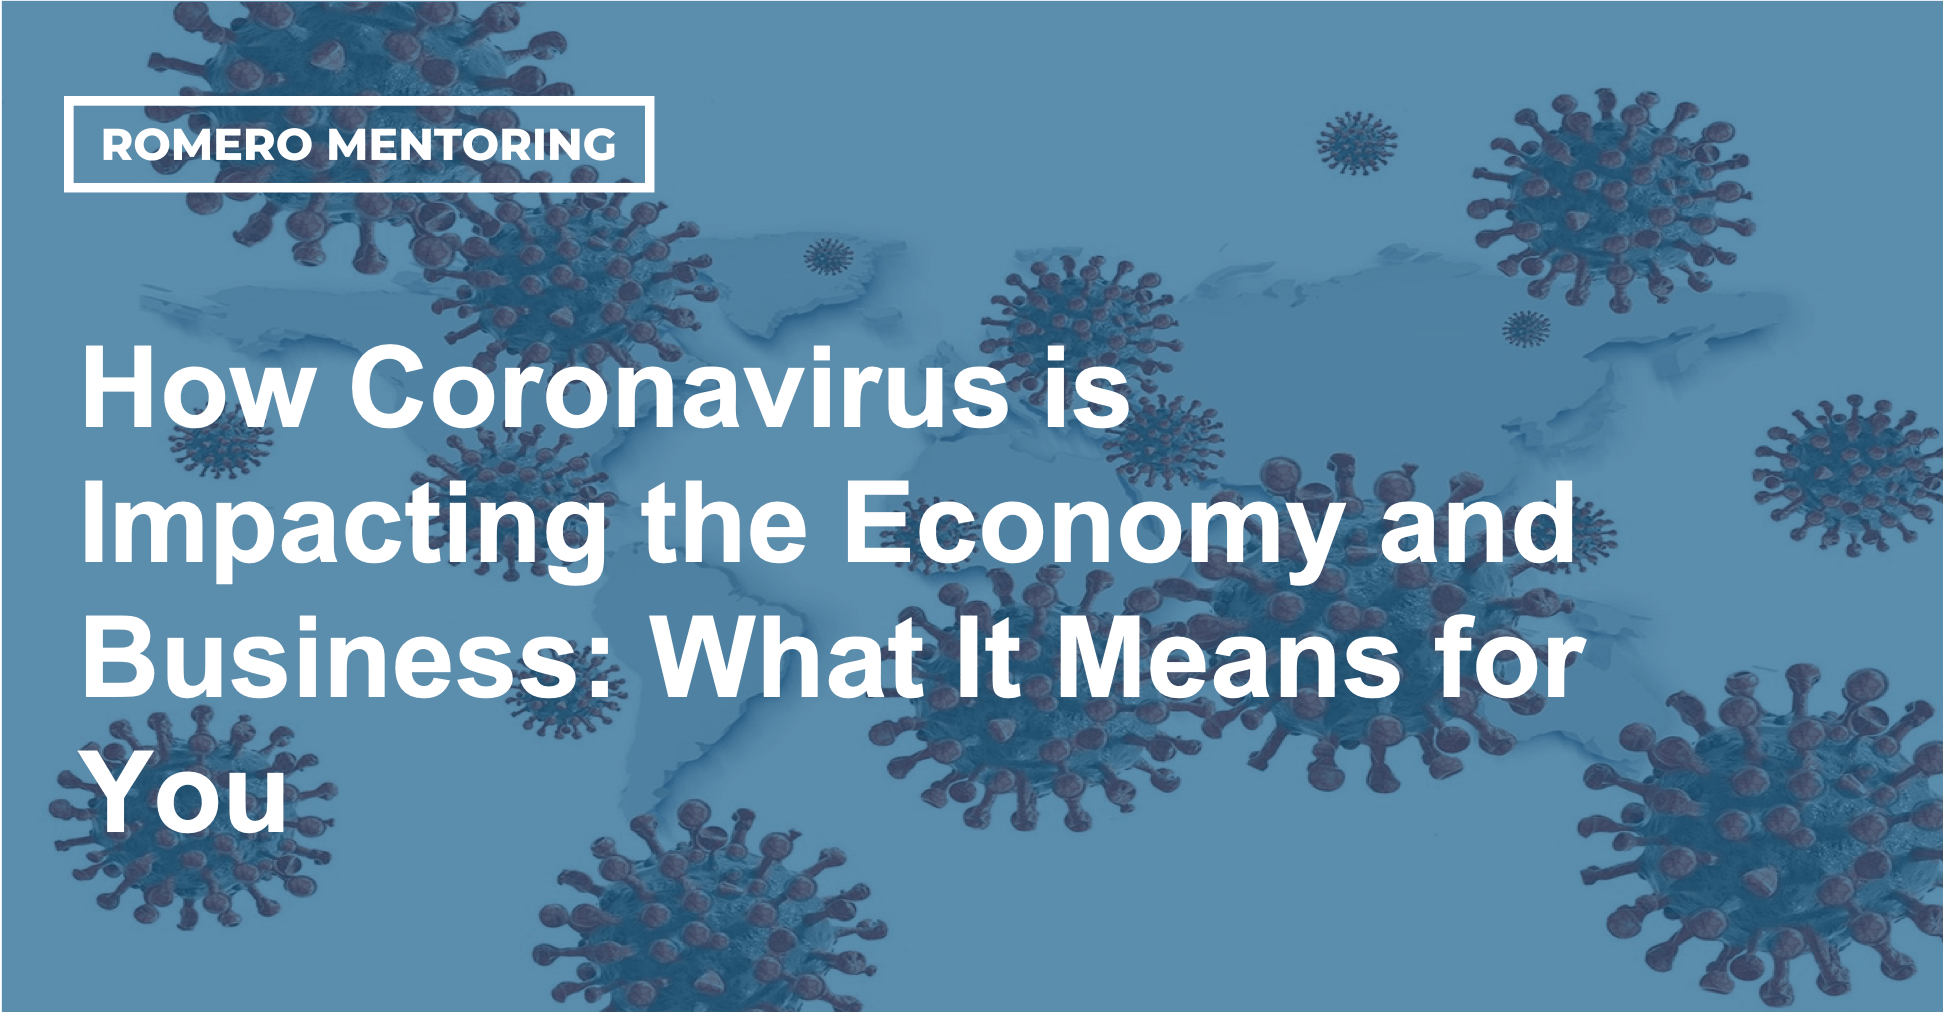 How Coronavirus is Impacting the Economy and Business: What It Means for You